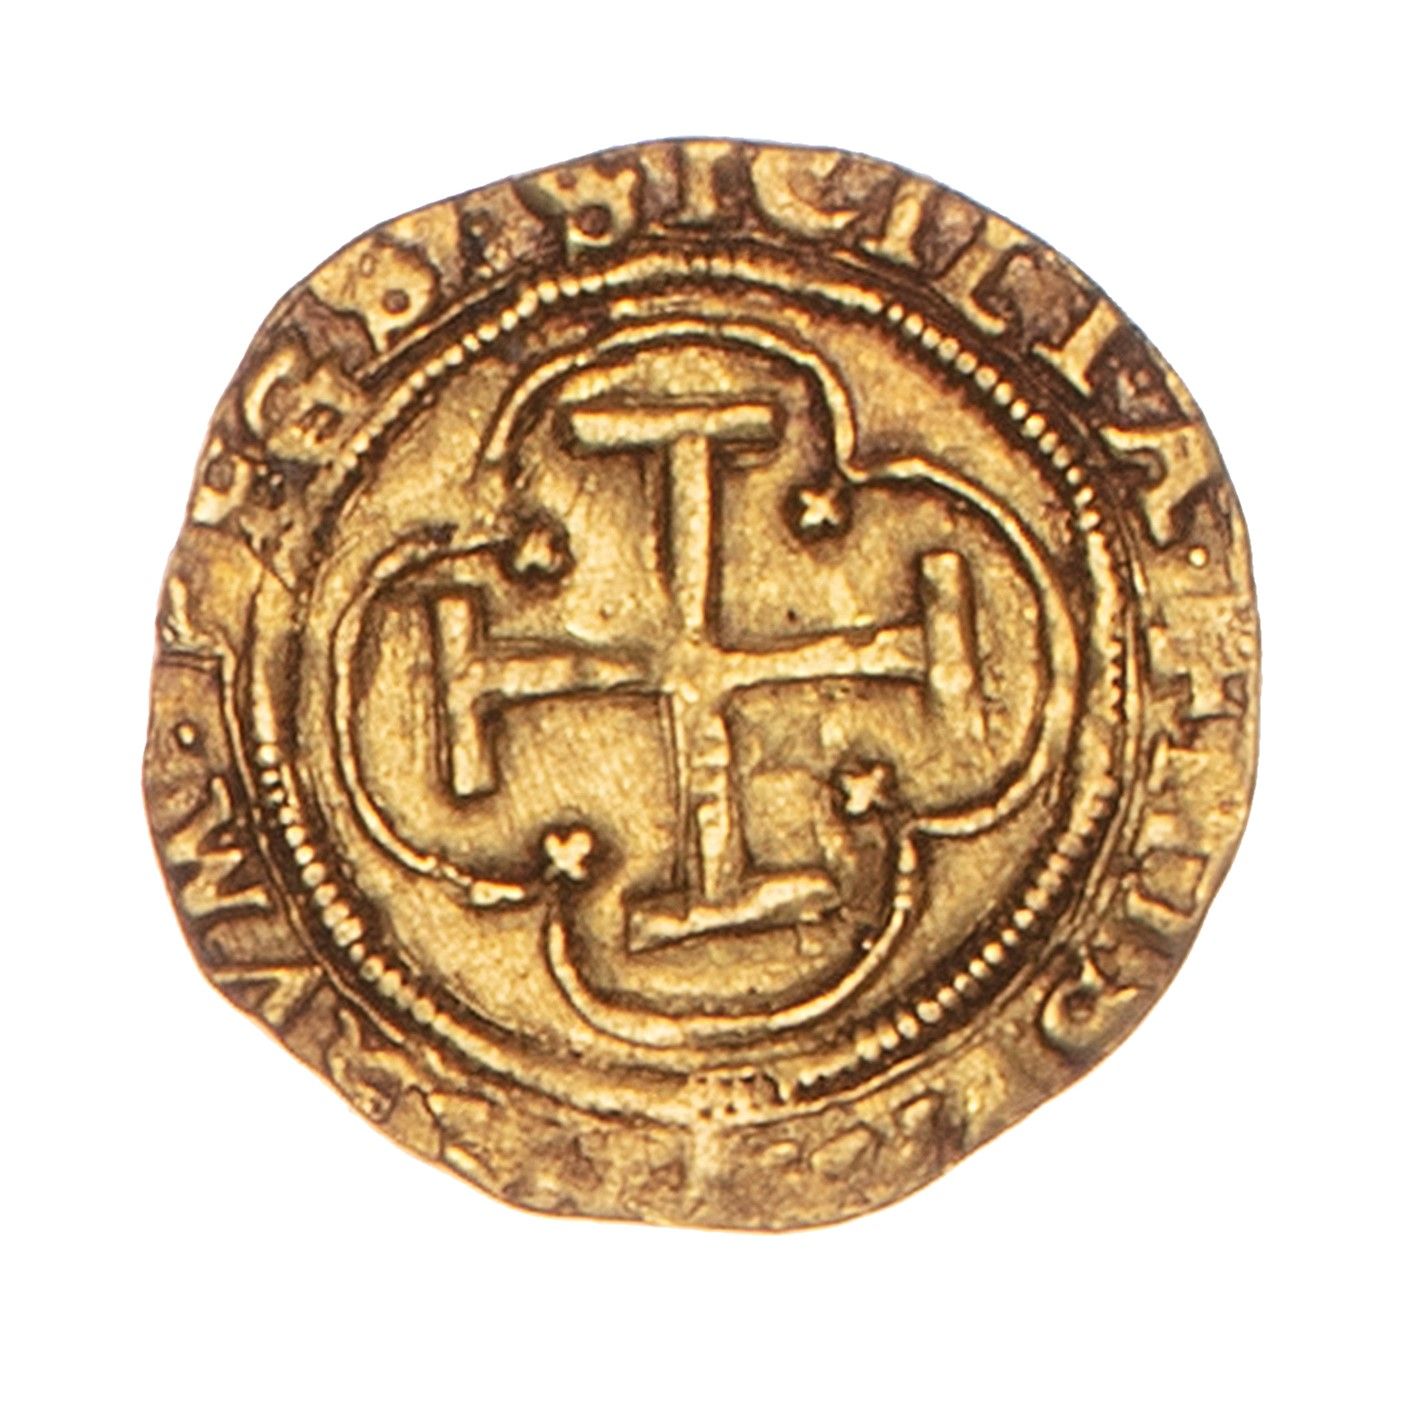 Null SPAIN - CHARLES & JEANNE (1516-1556)

1 escudo or Toledo T M.

Fr. : 154. 
&hellip;